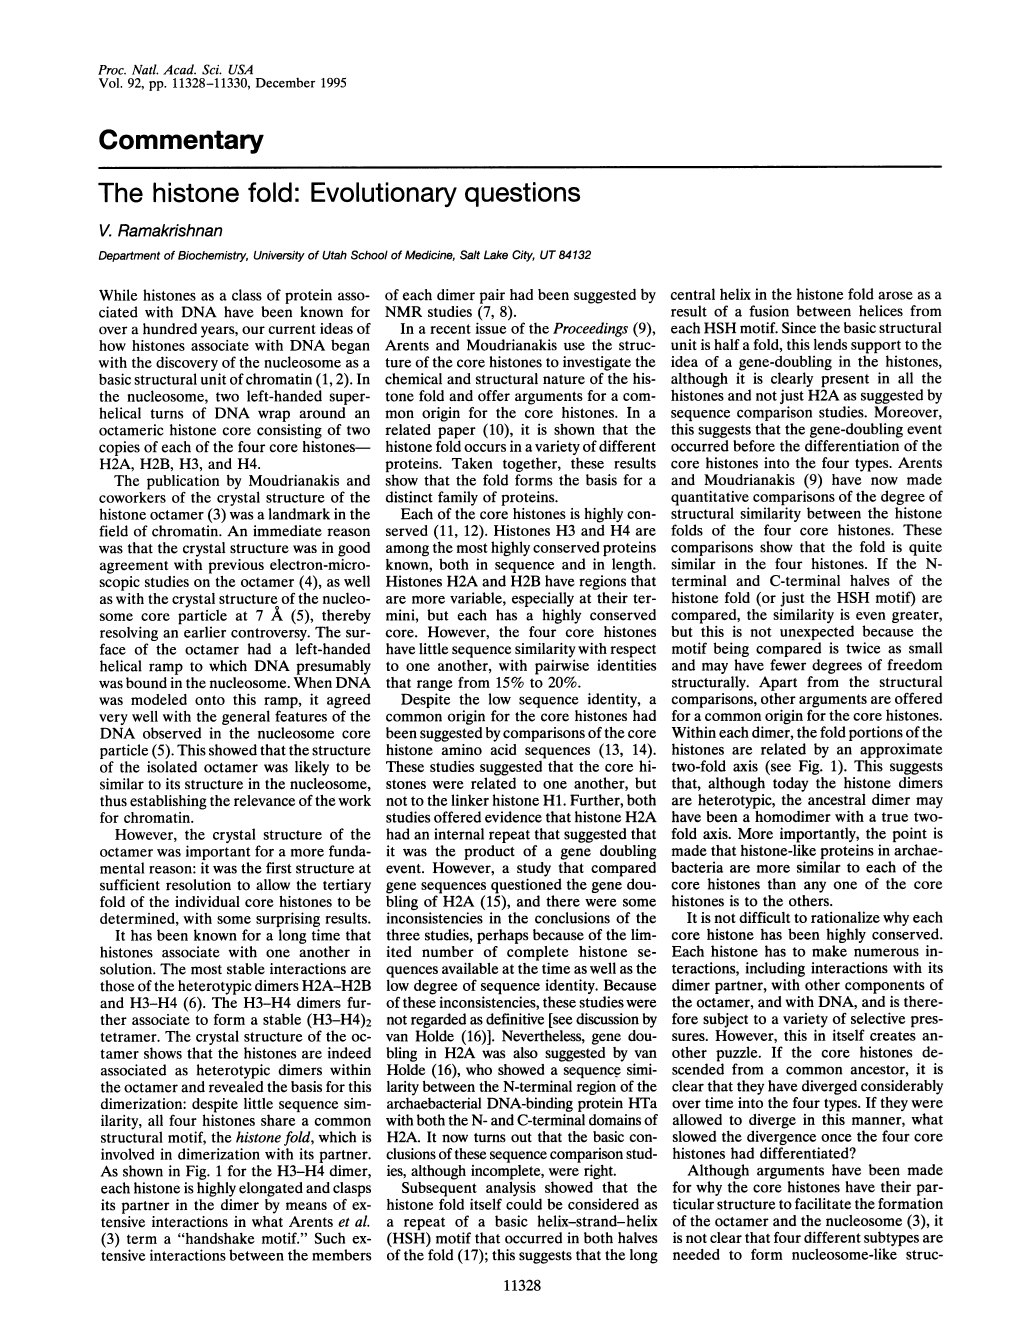 Commentary the Histone Fold: Evolutionary Questions V